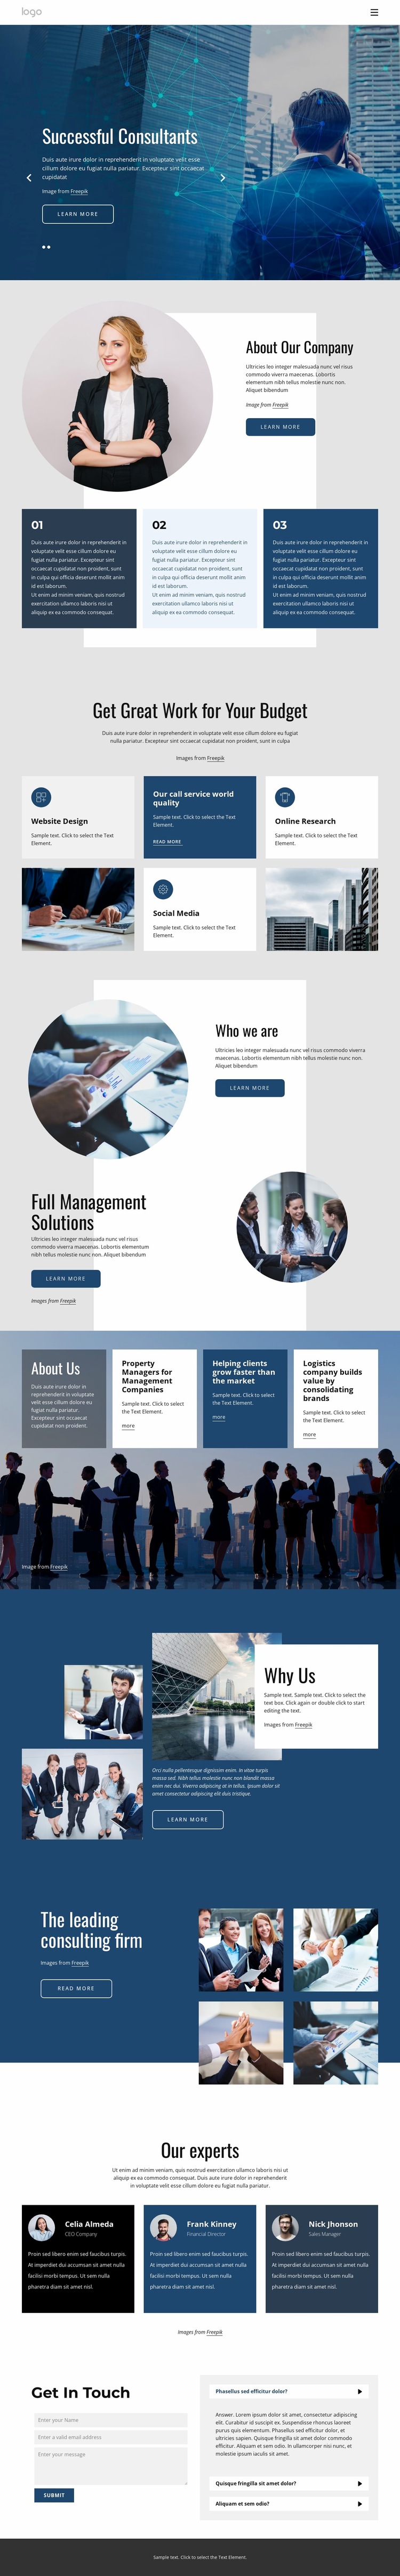 We offer tailored consulting services Website Builder Templates